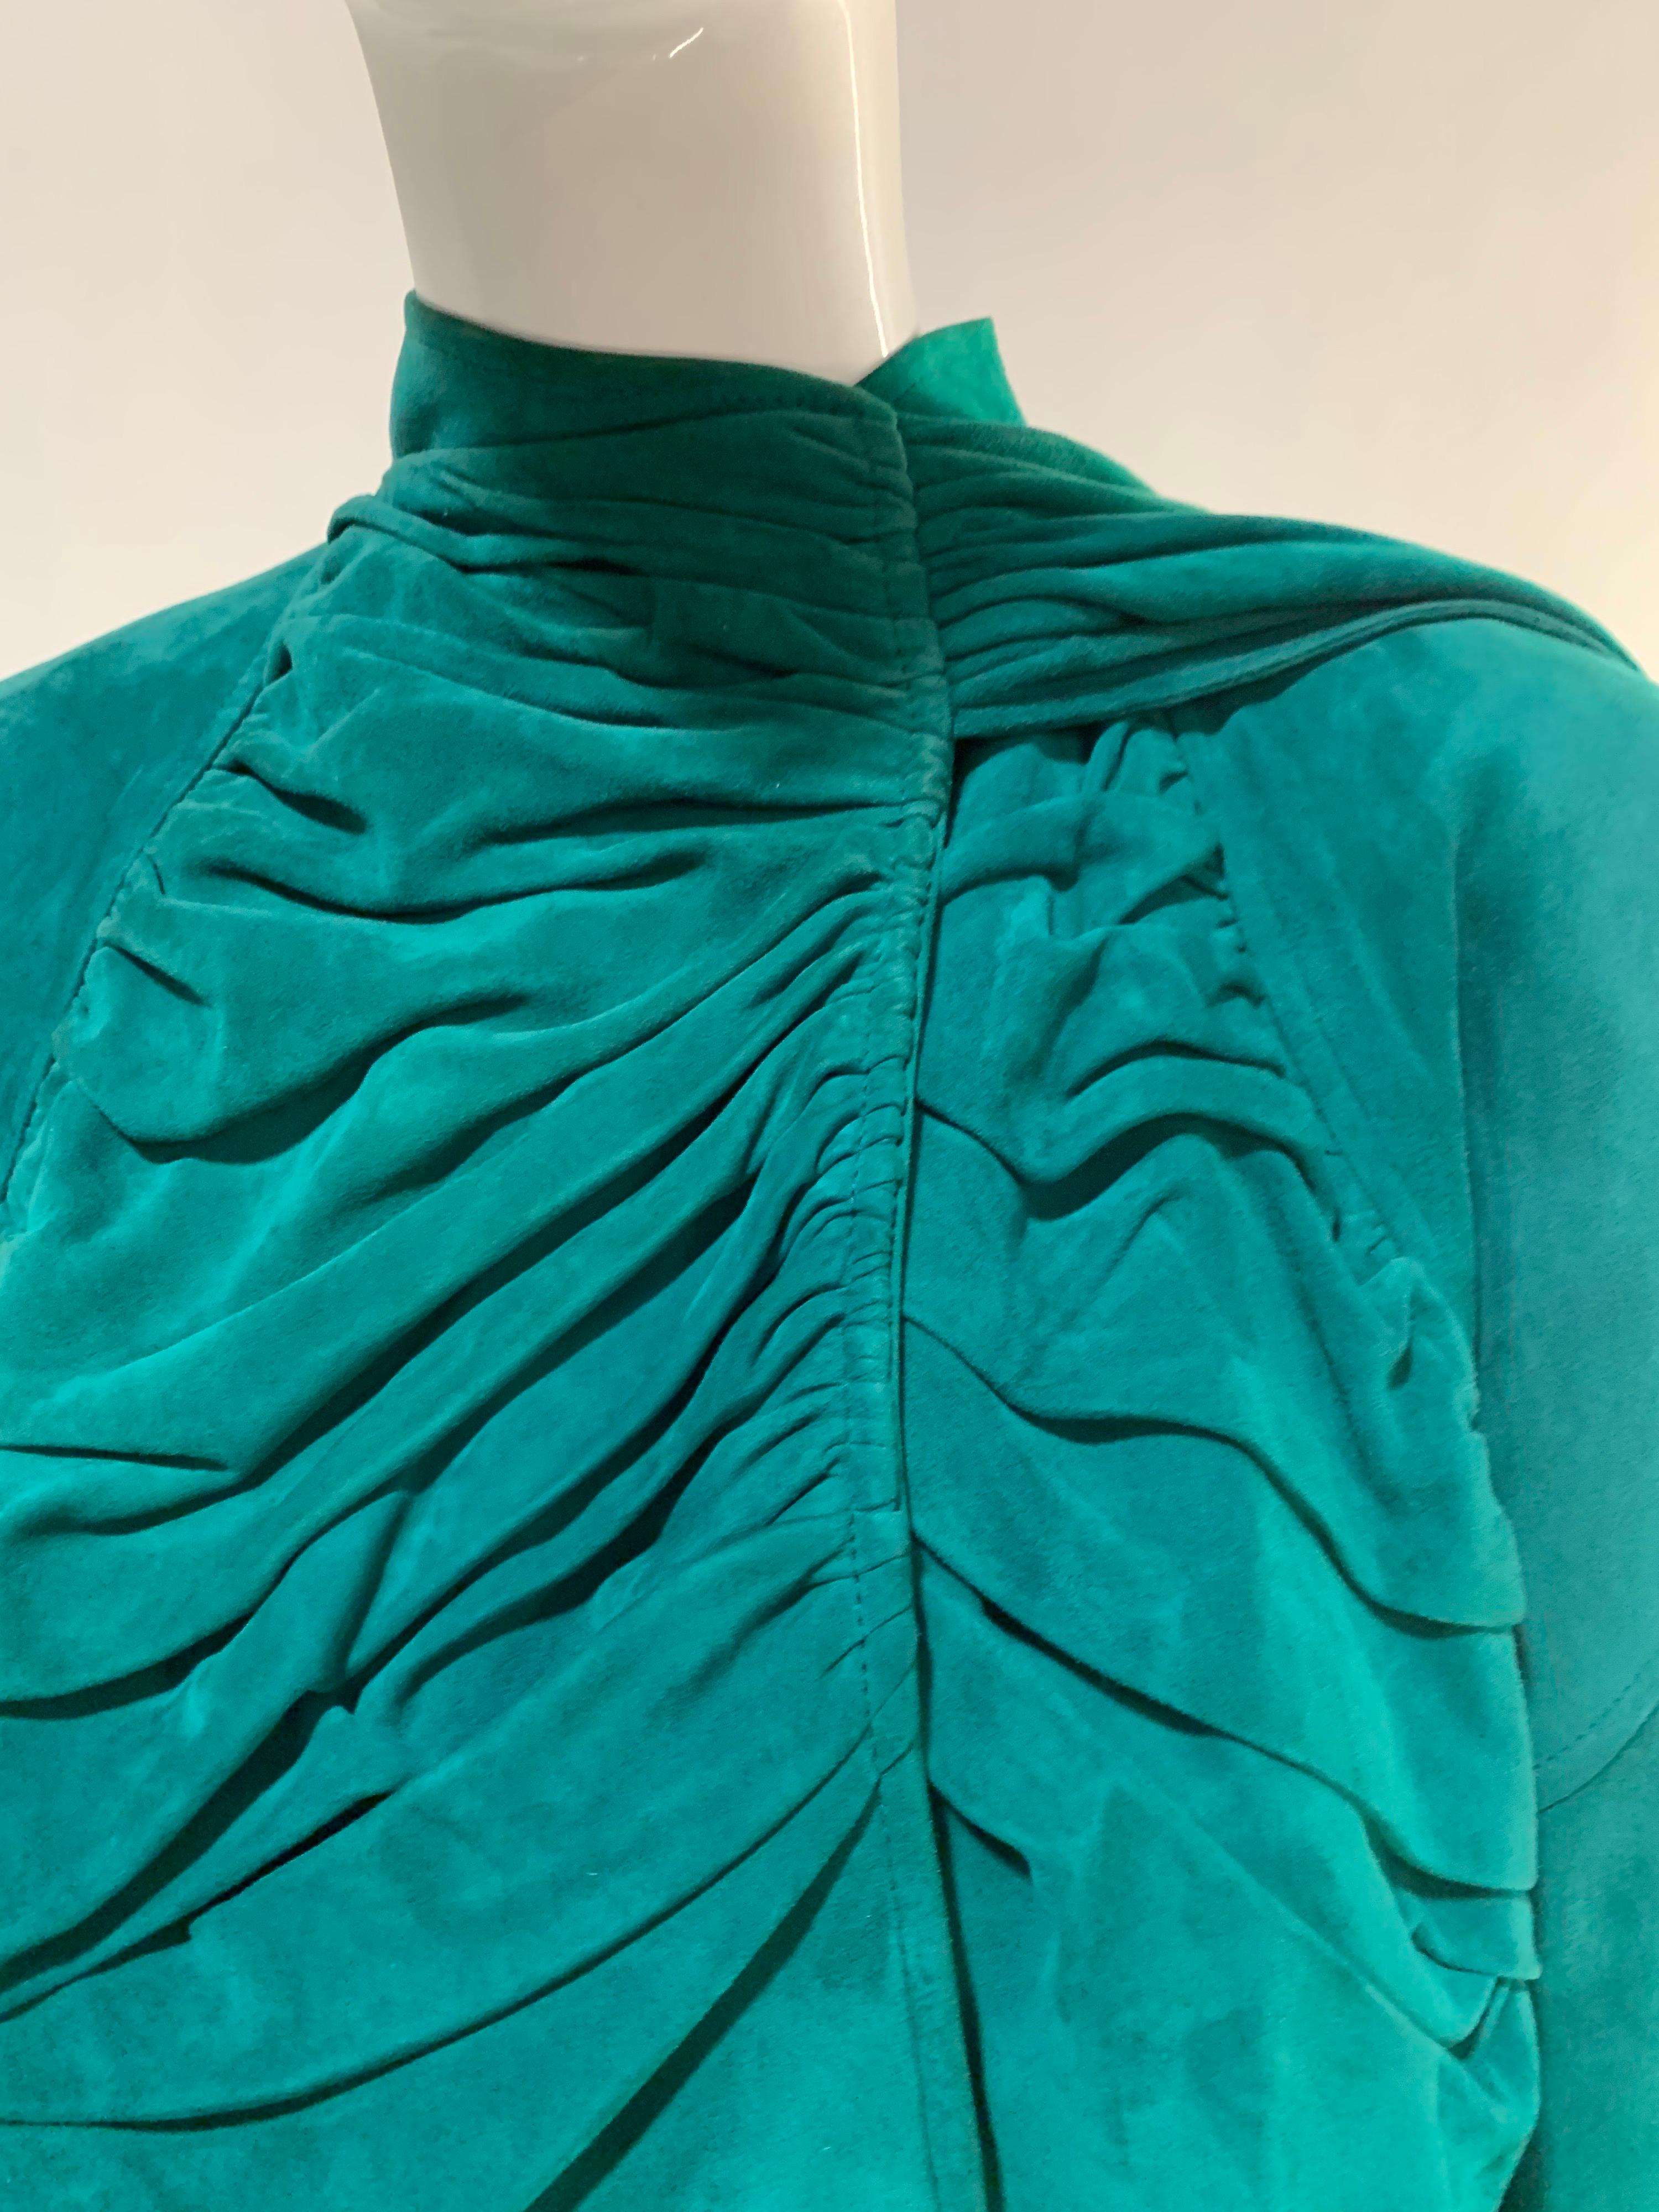 Blue 1980s Jean Claude Jitrois Emerald Suede Jacket w/ Gathered Front & Large Foulard For Sale